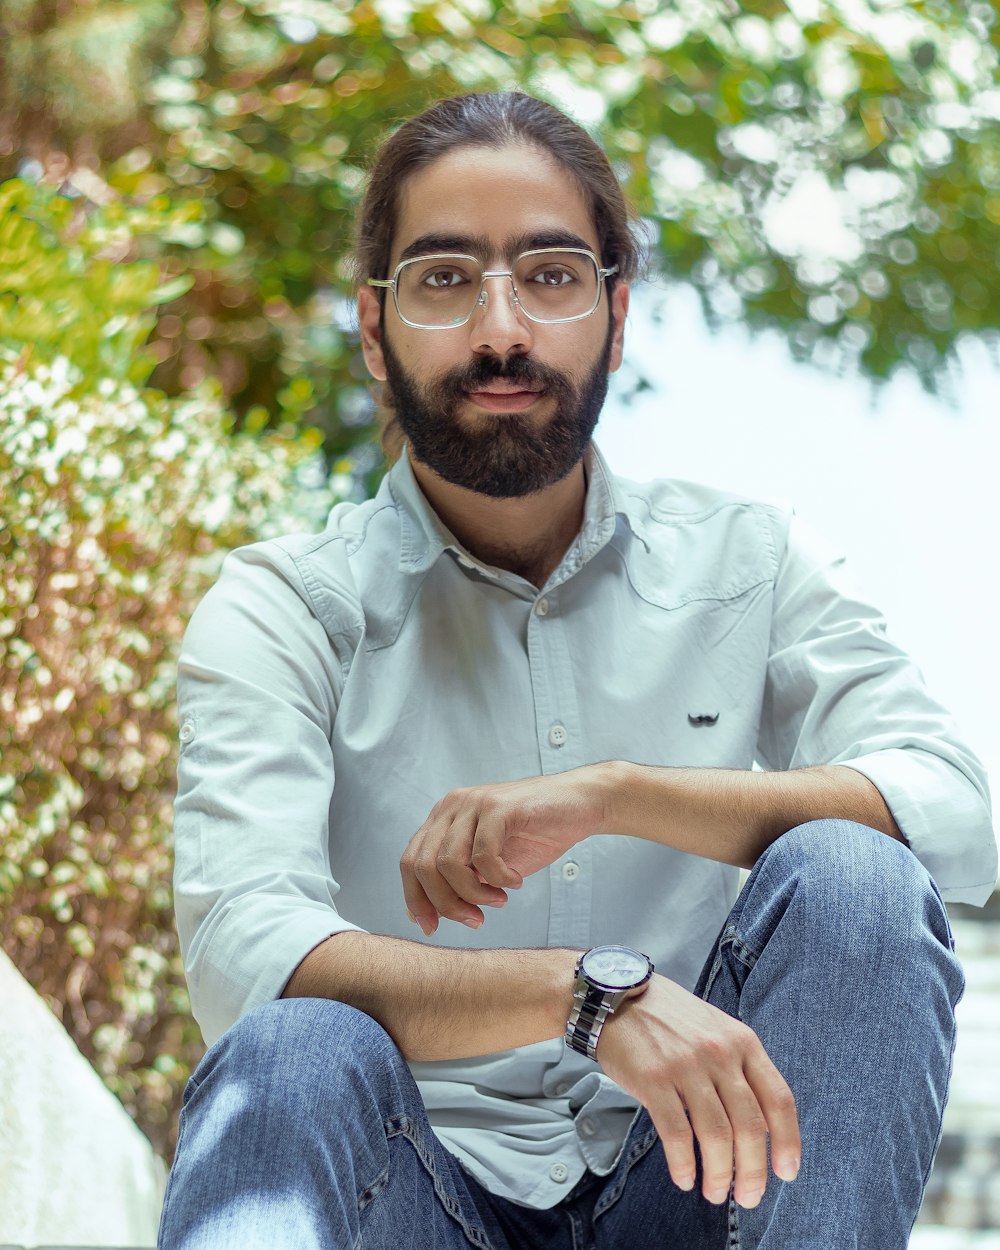 a man with a beard and glasses sitting on a bench